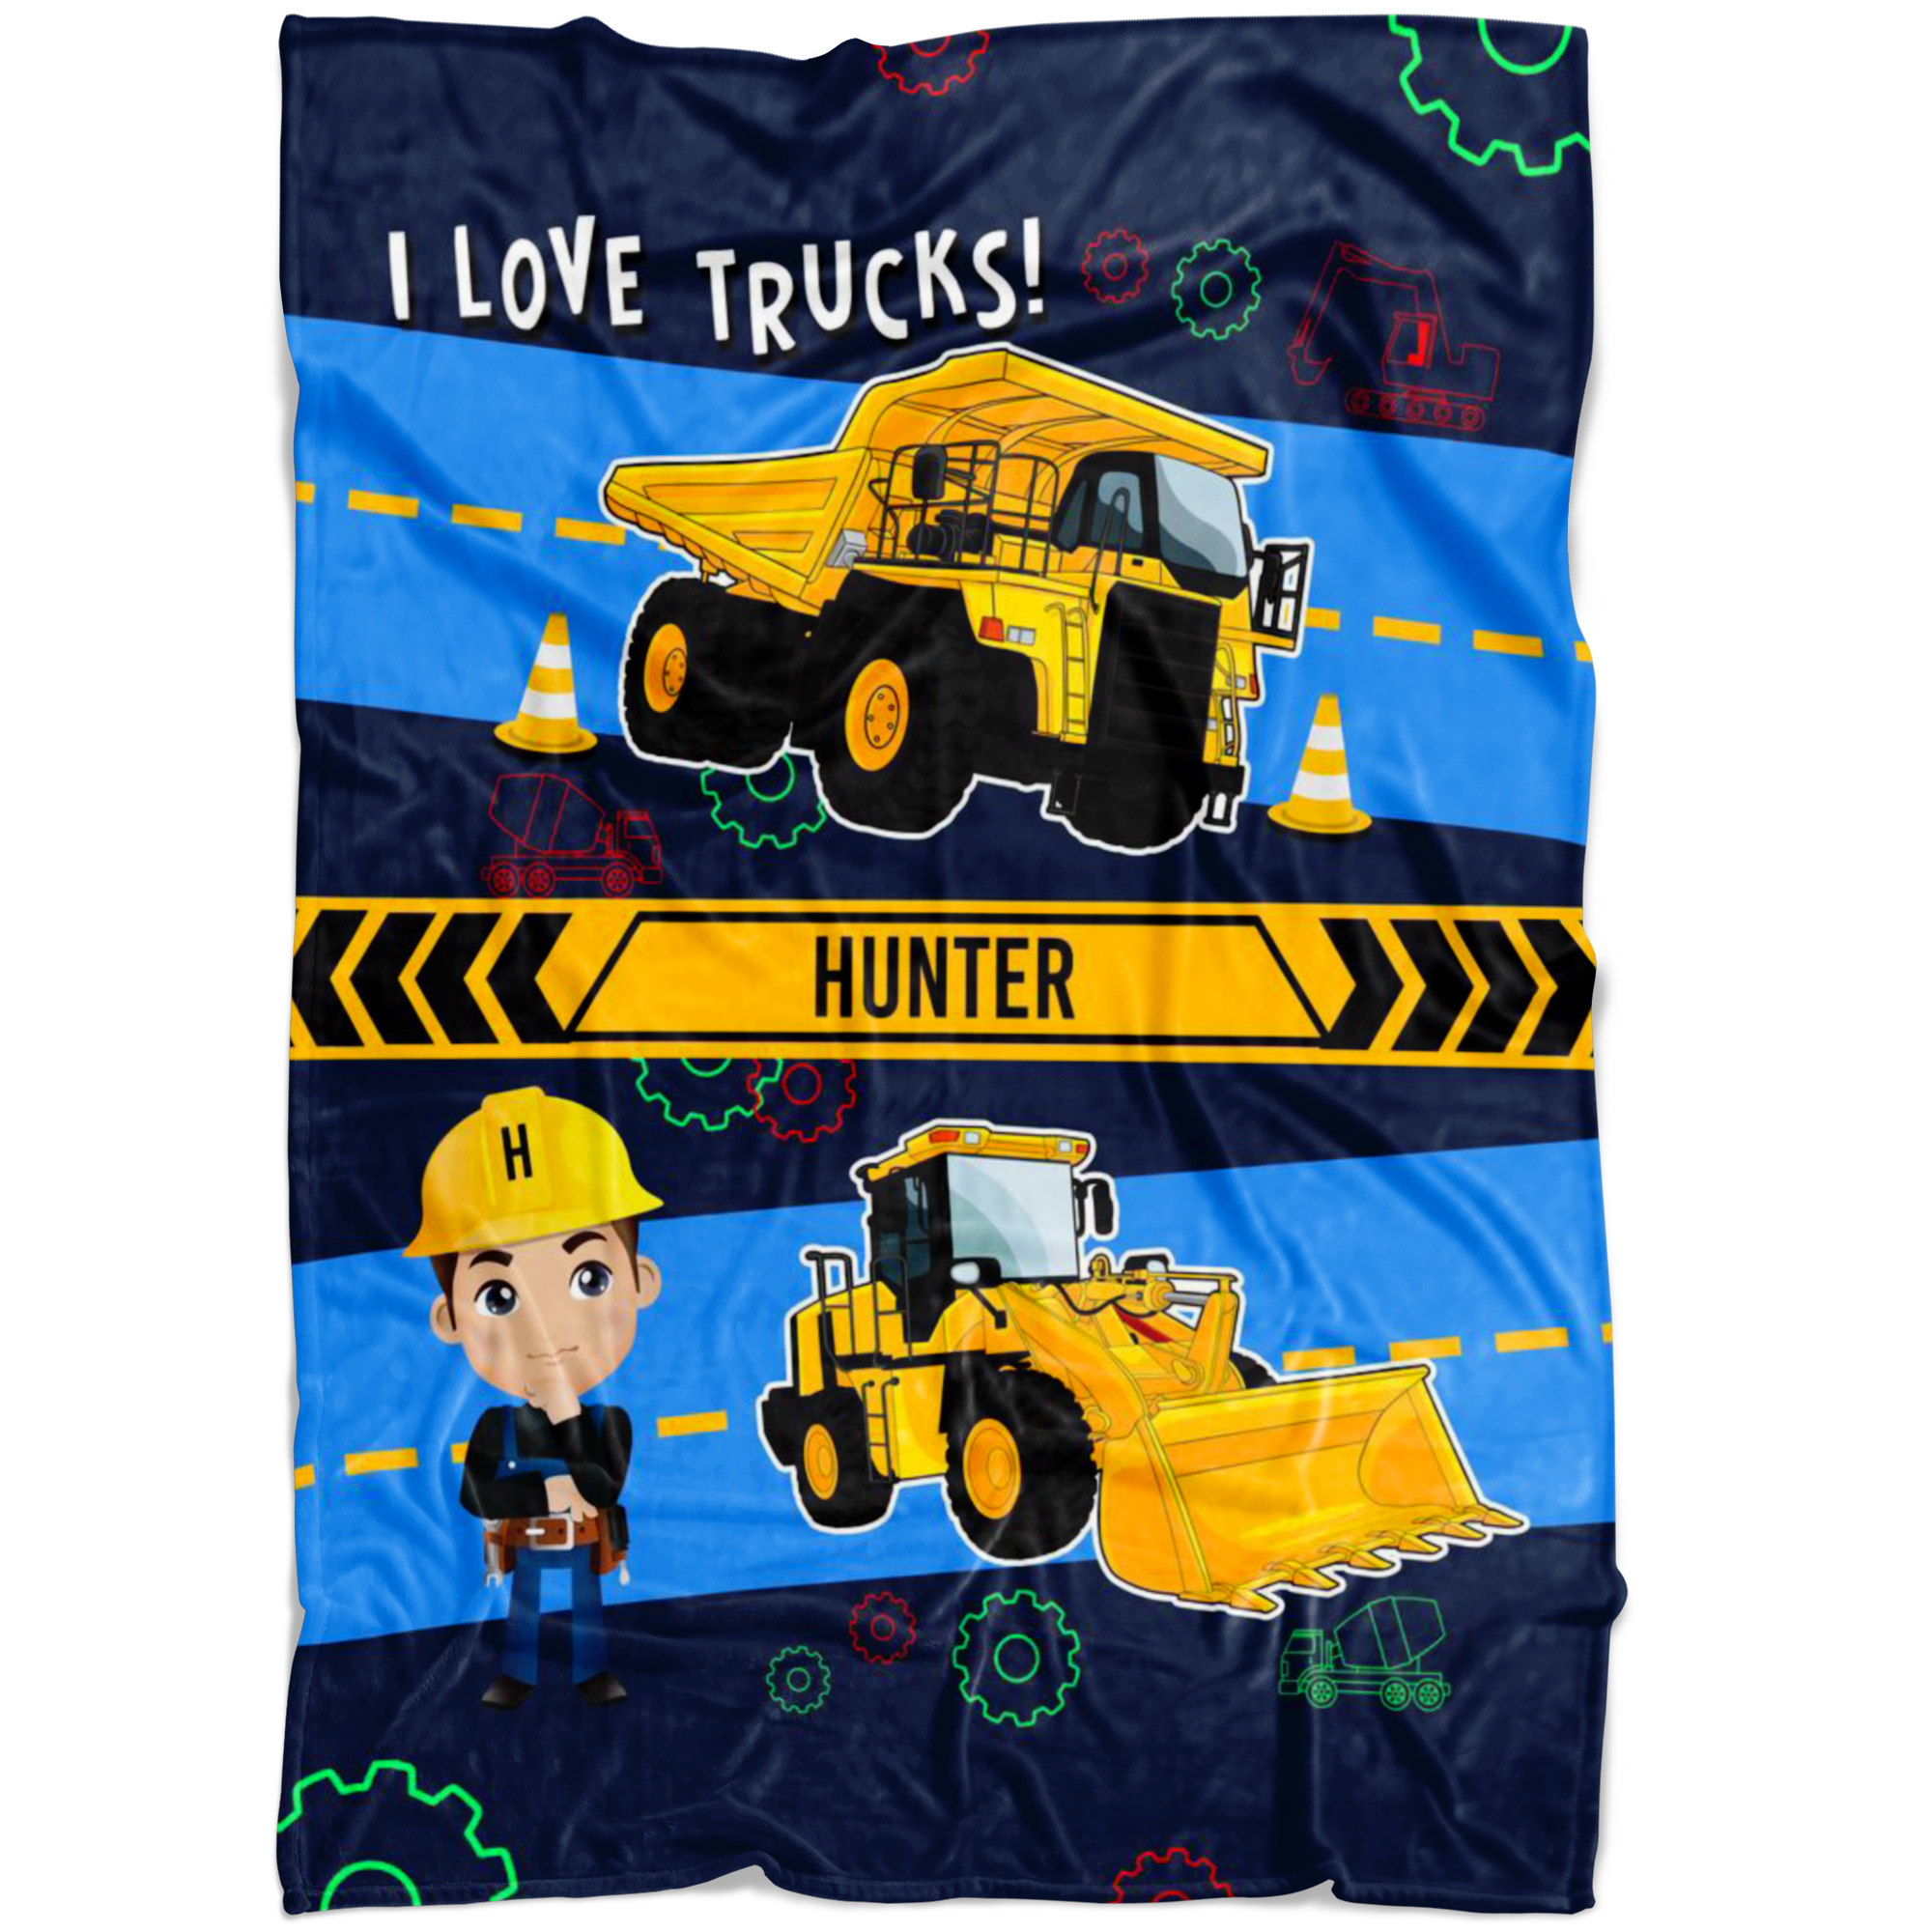 Personalized Name I Love Trucks Blanket for Boys & Girls with Character Personalization - HUNTER